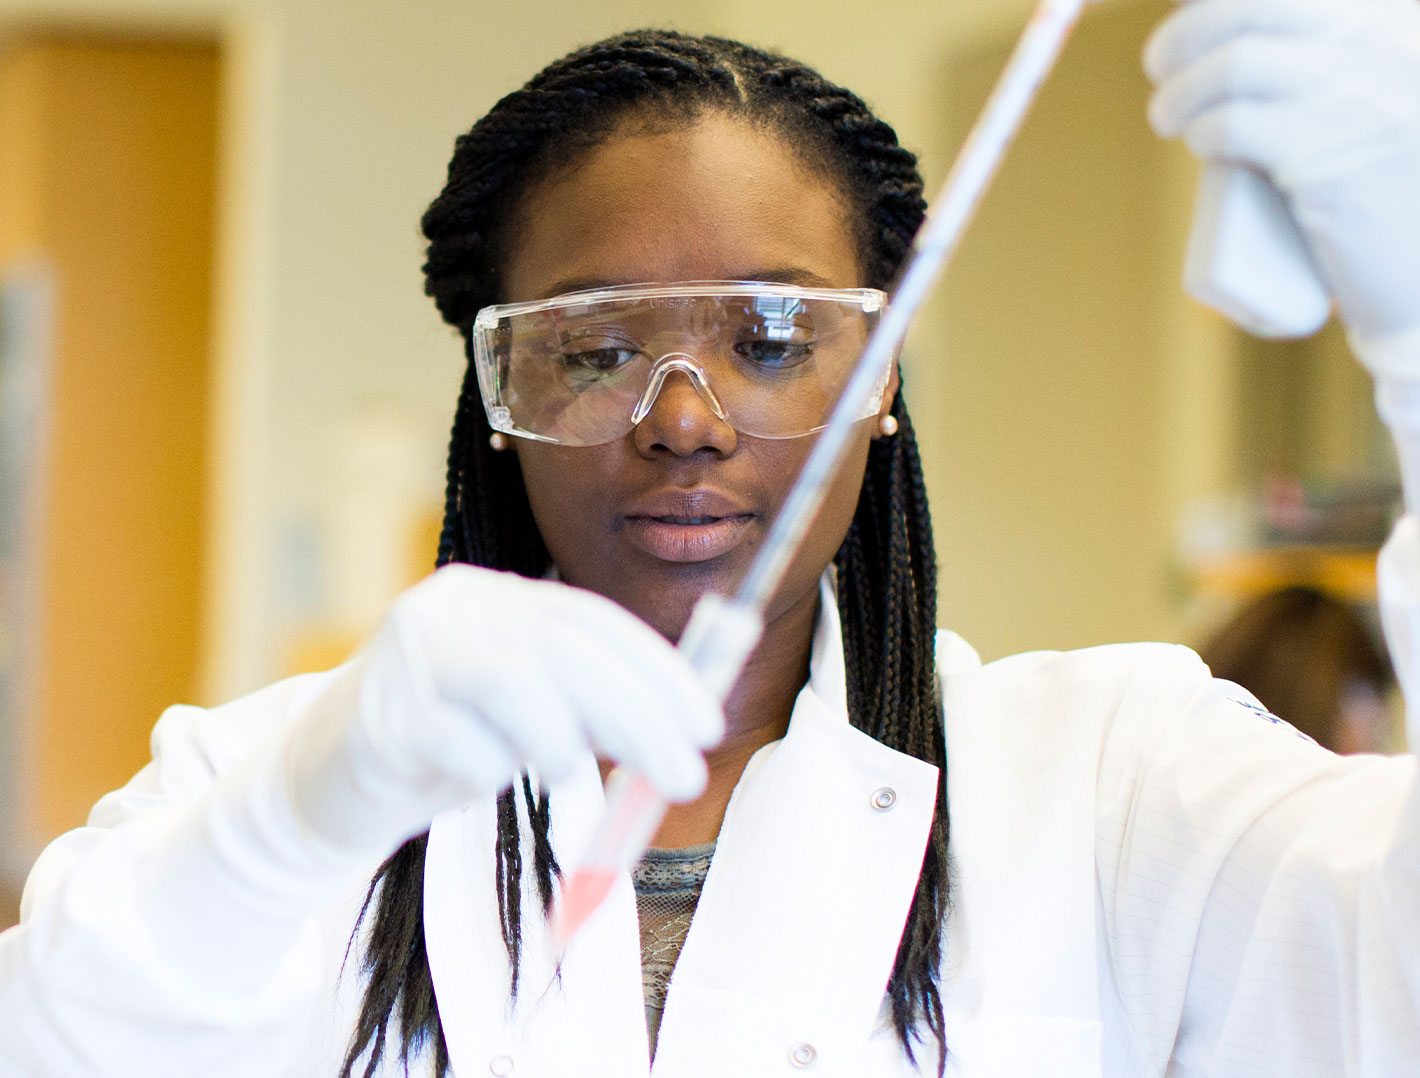 Student with a lab coat and goggles on holding a pipet in a lab setting.